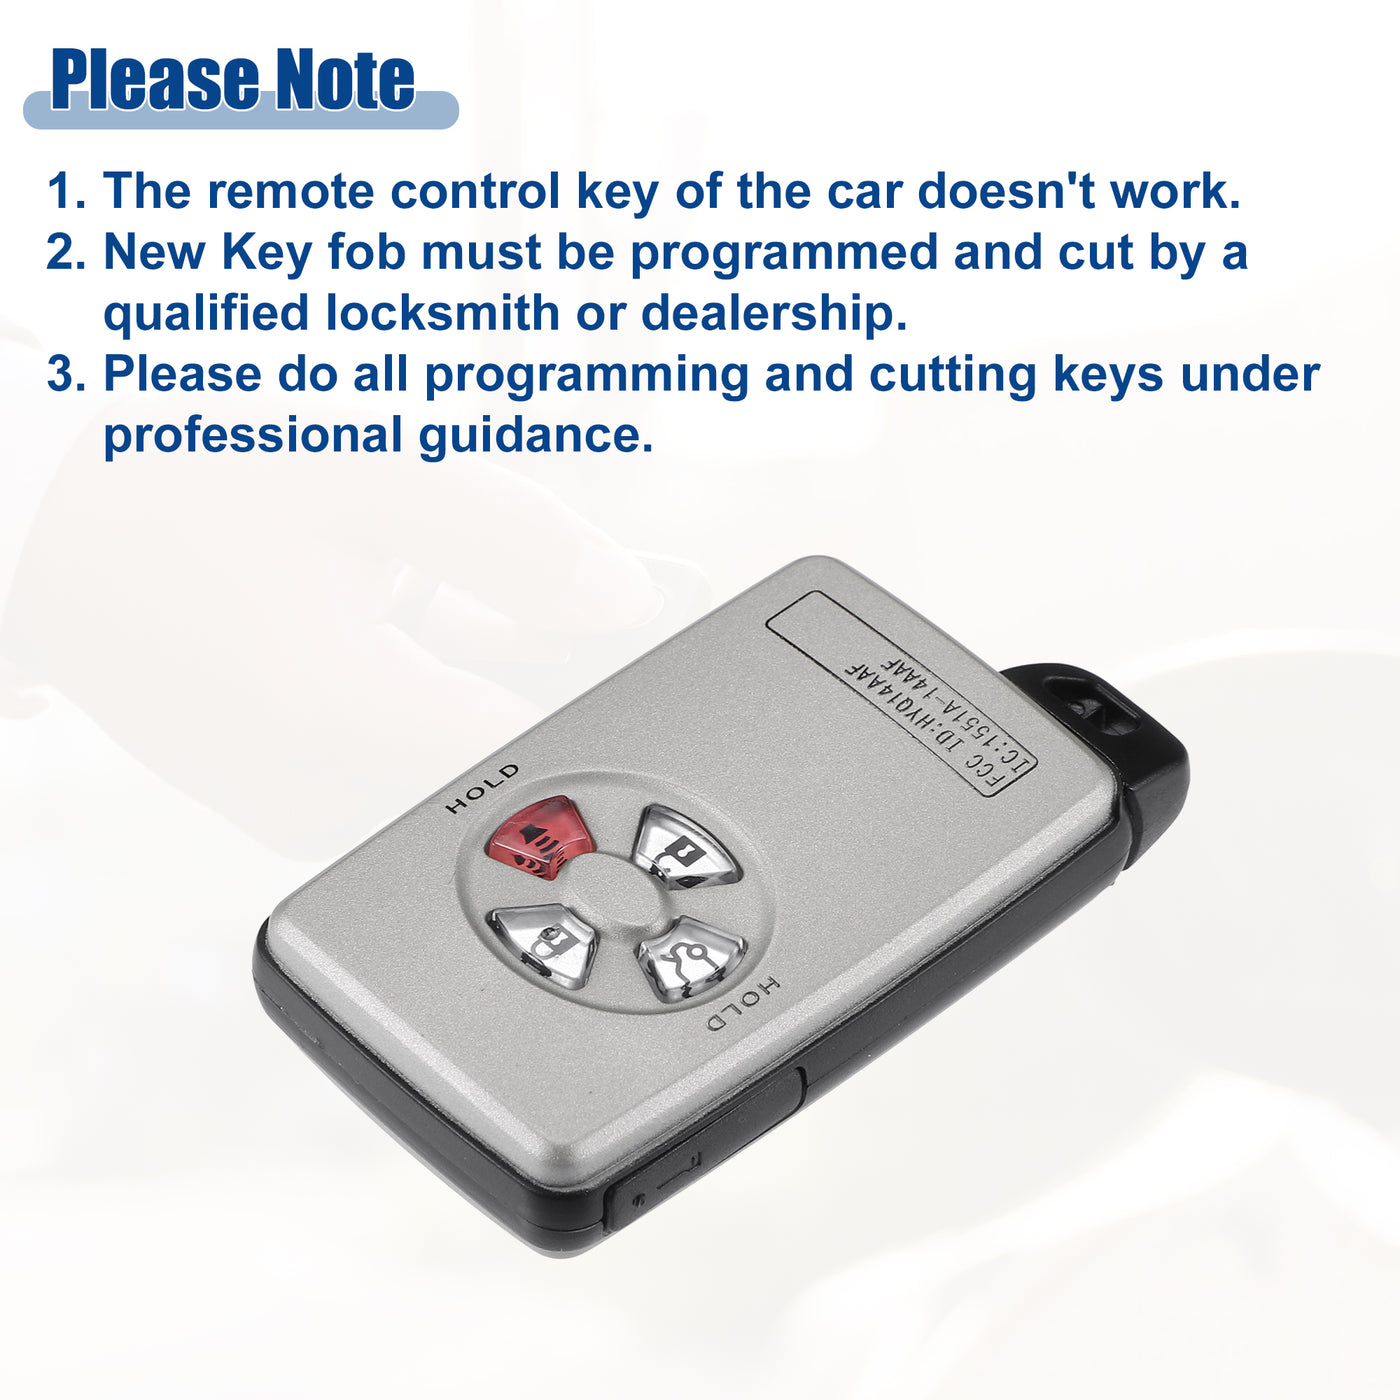 ACROPIX 314.3 MHz Key Fob Keyless Entry Remote Fit for Toyota Avalon 2005-2007 ASK System HYQ14AAF - Pack of 1 Black